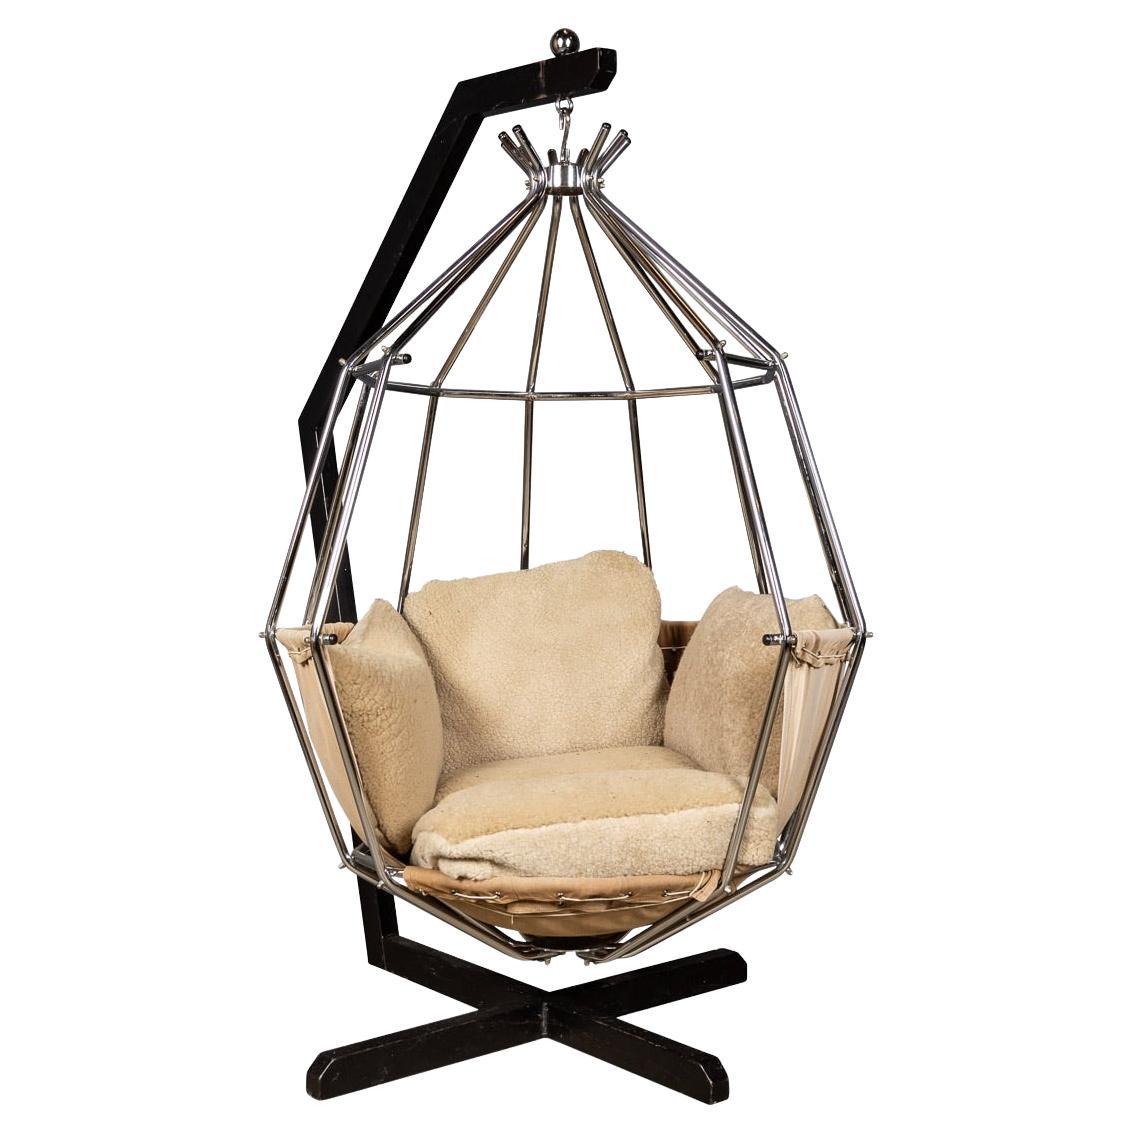 Elegant Parrot Cage Chair by Ib Arberg, c.1970 For Sale